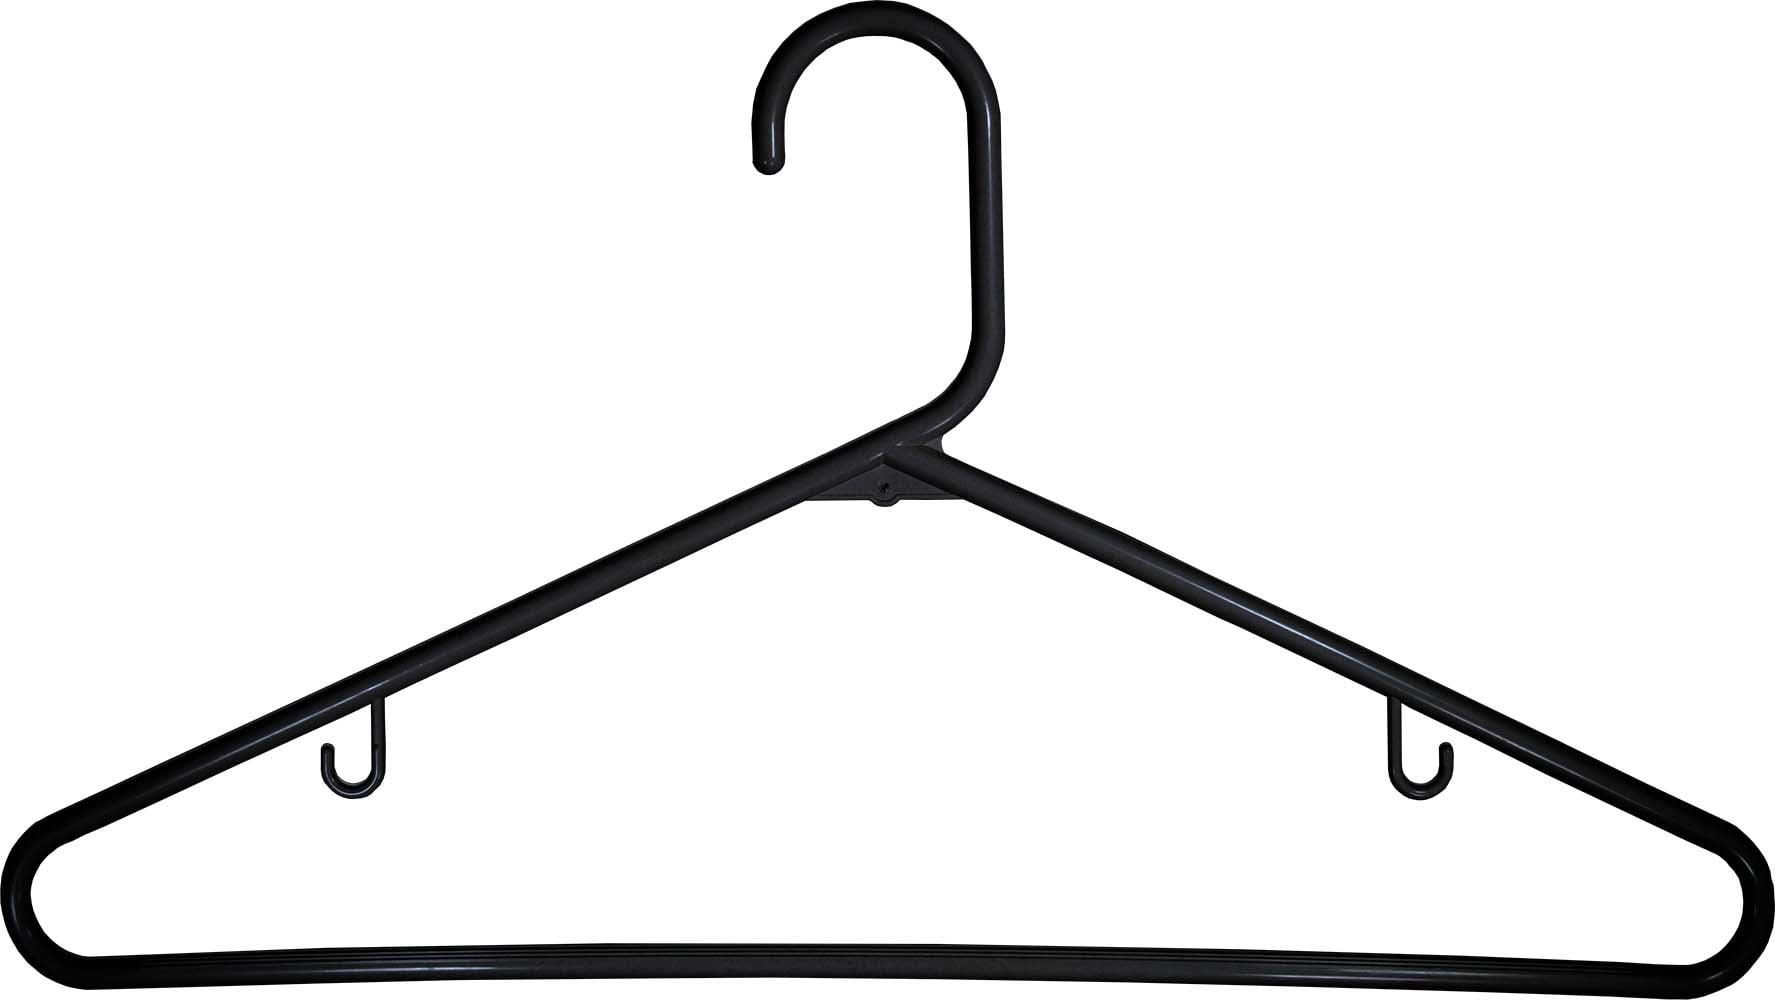 Plastic Hangers HD Heavy Duty, 16 Pcs. Elegant Black Color, Made in USA,  3/8” Thickness, Durable, Tubular, Lightweight, for Clothes, Coat, Pants,  Shirts, Dress and More, Free and Quick delivery. : Home & Kitchen 